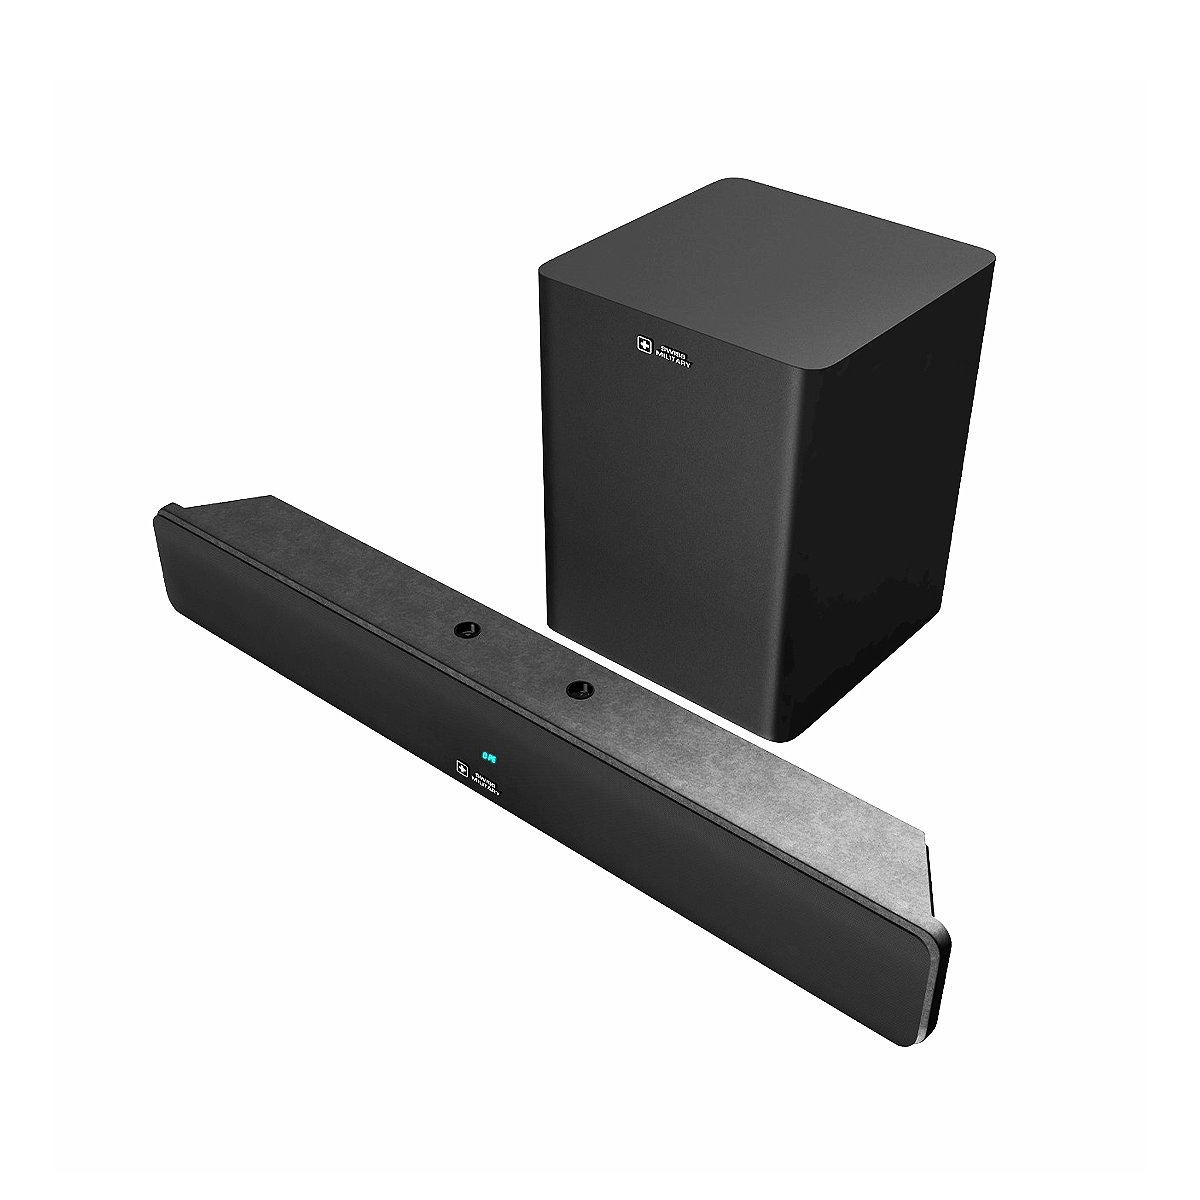 EUPHORIA WIRELESS REMOTE CONTROLLED BLUETOOTH SOUNDBAR - THE ULTIMATE AUDIO DEVICE FOR MUSIC LOVERS